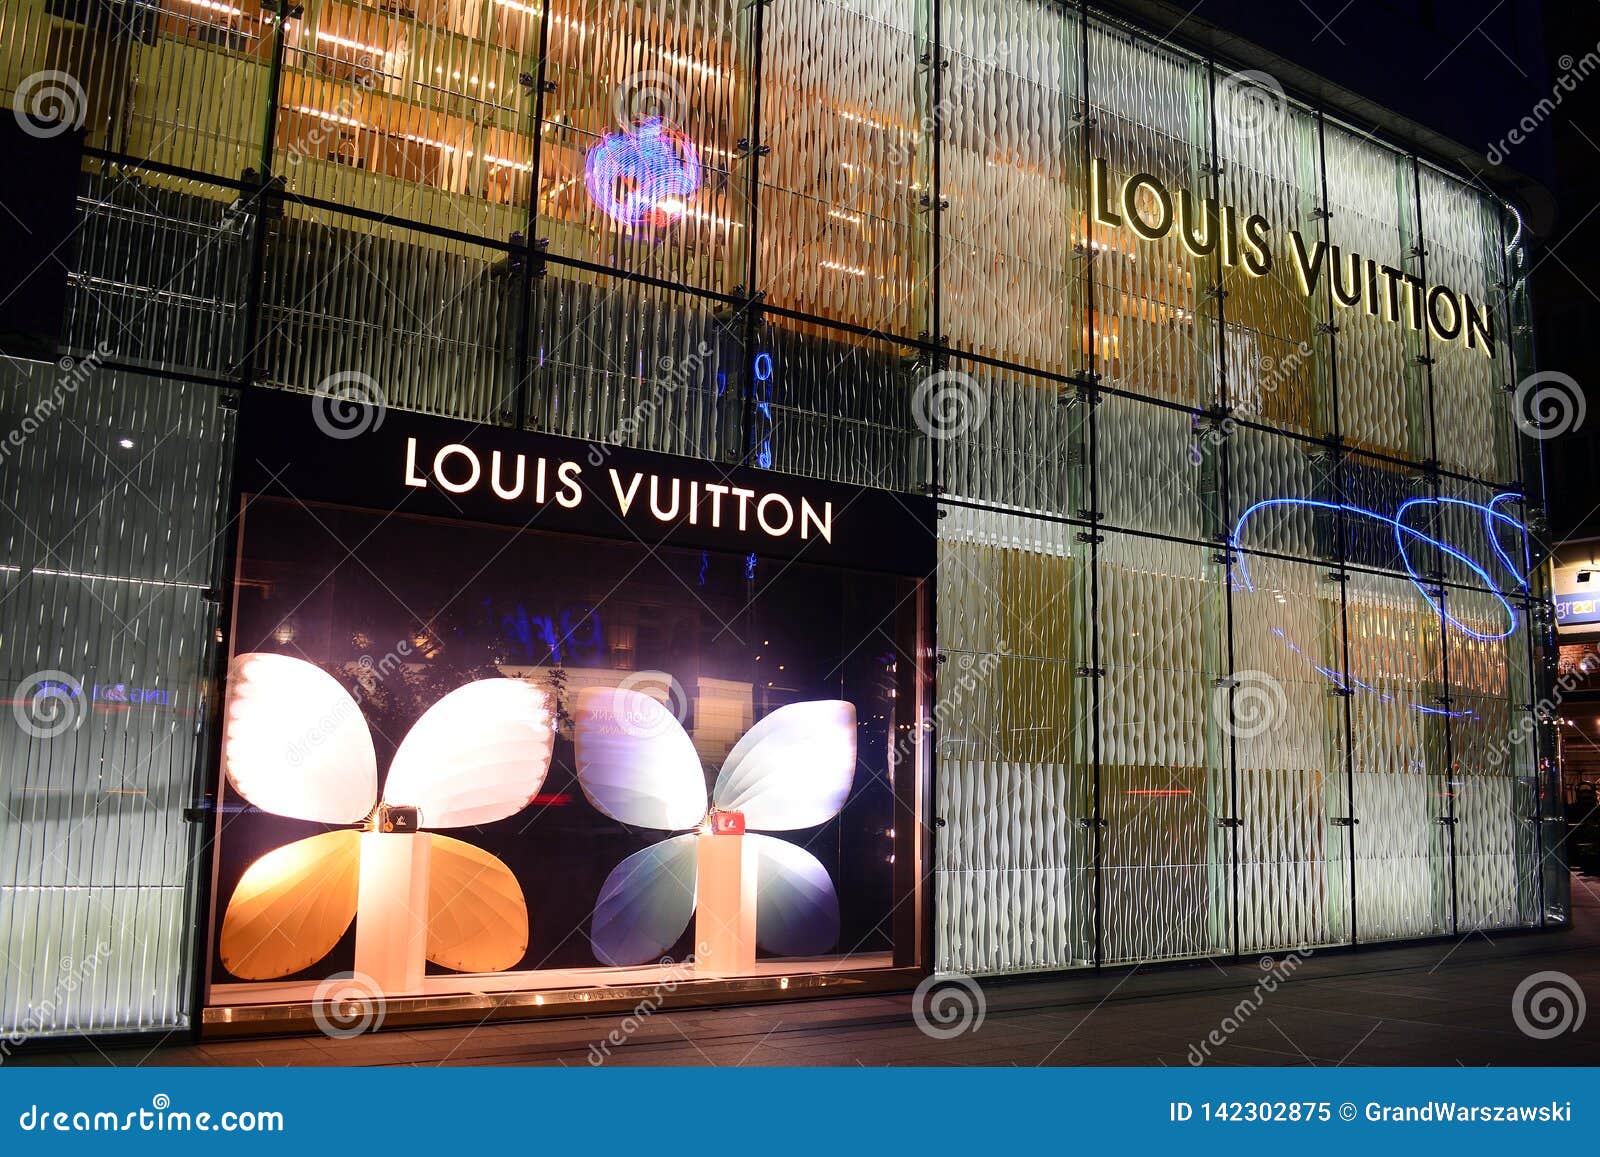 Louis Vuitton. Company Signboard Louis Editorial Image Image of frame, billboard: 142302875